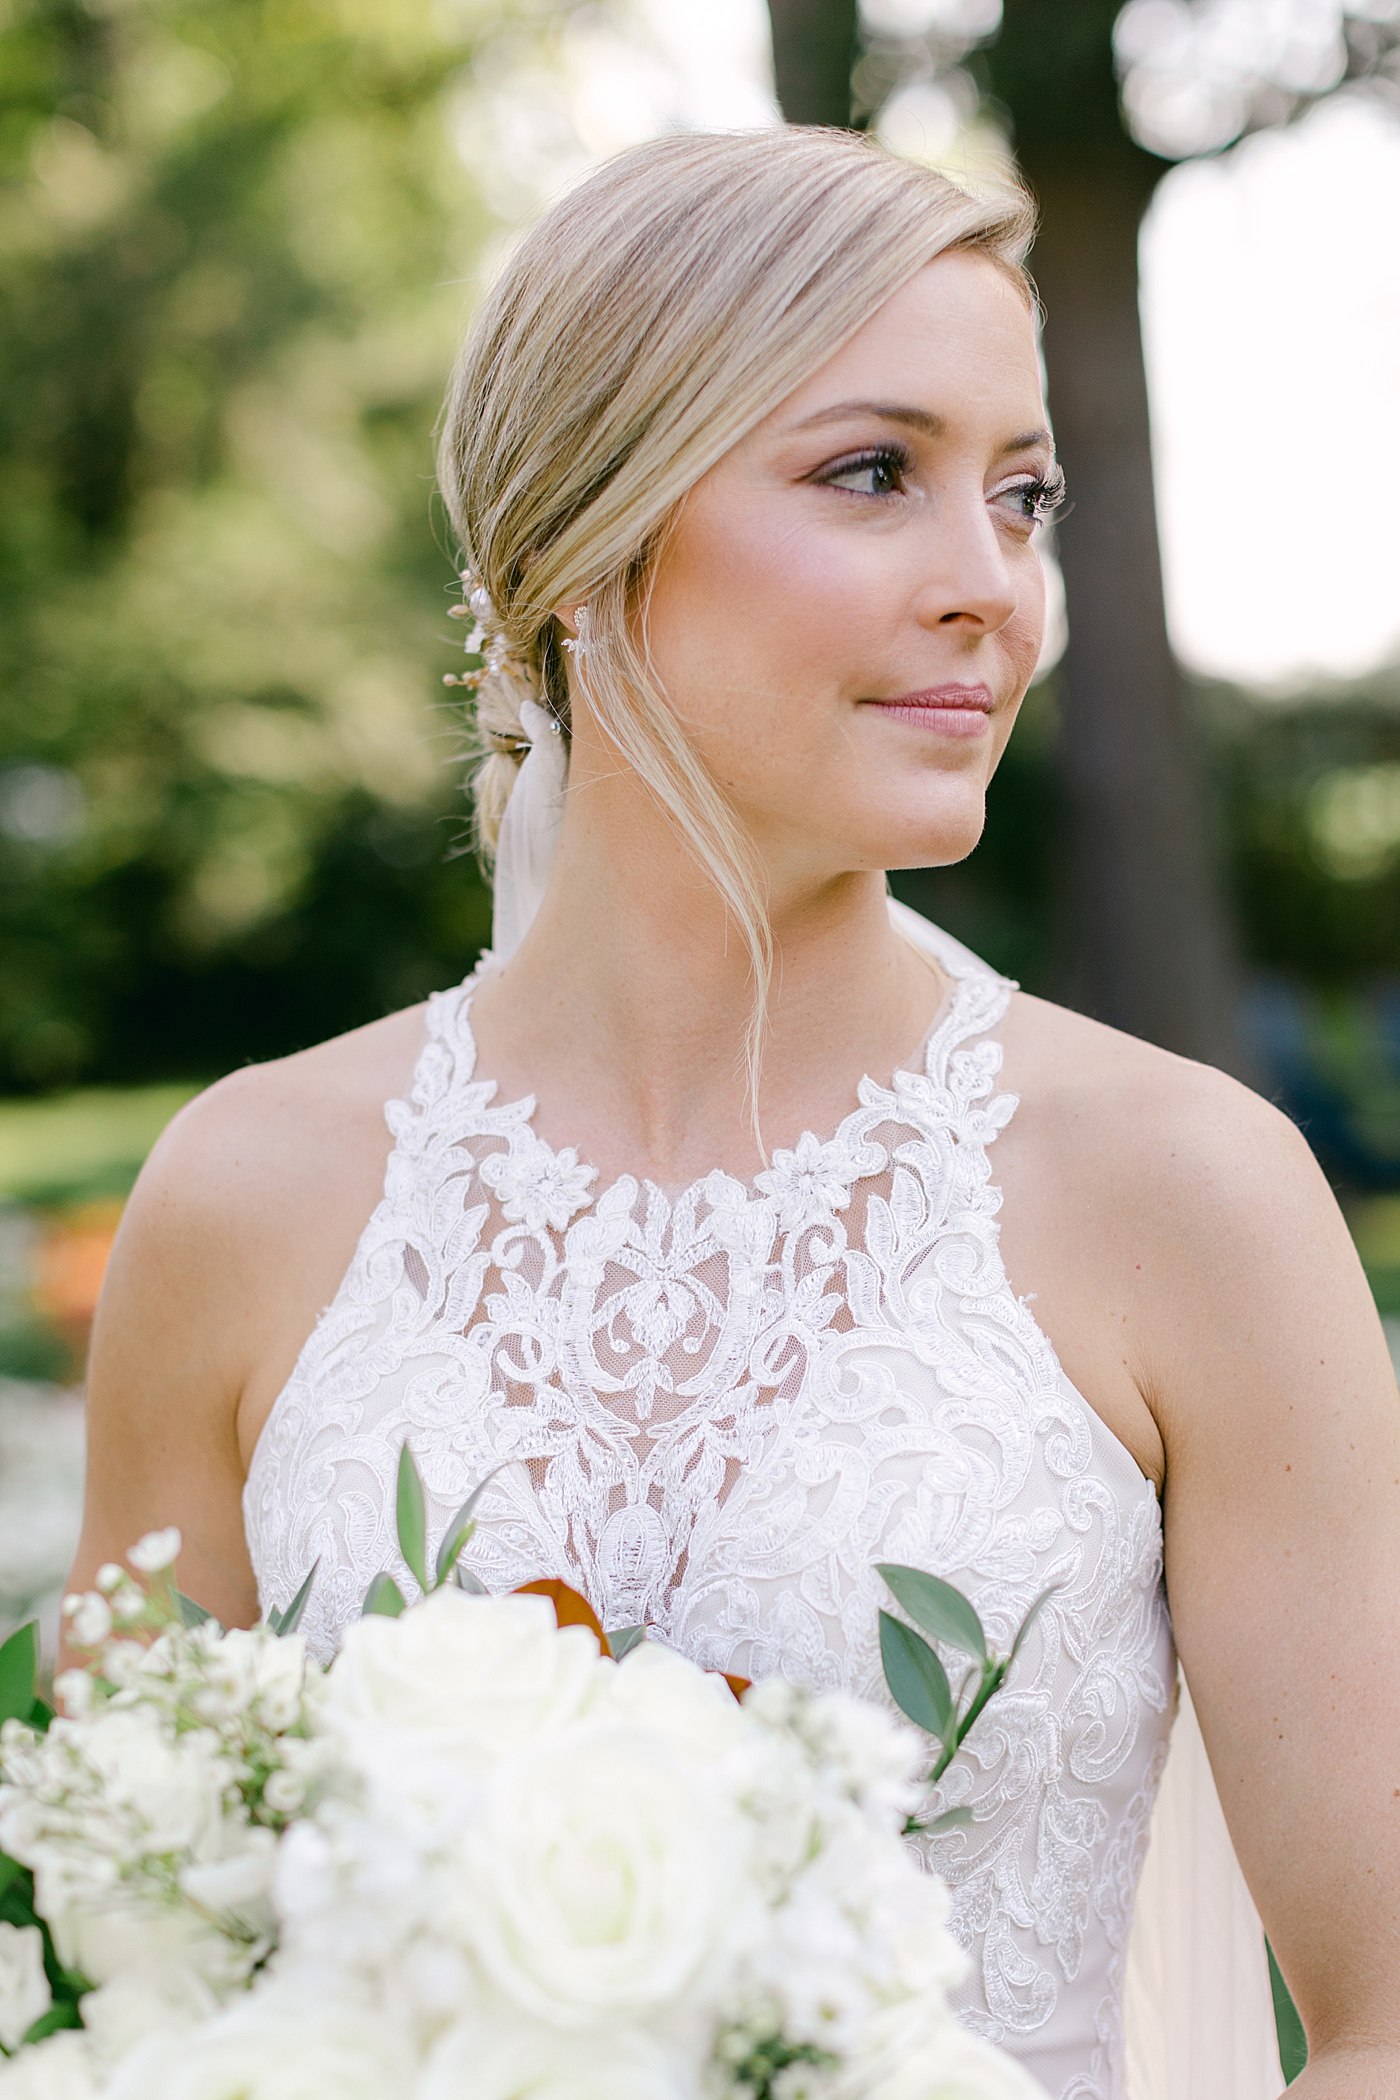 Bride looking over her shoulder | Image by Hope Helmuth Photography